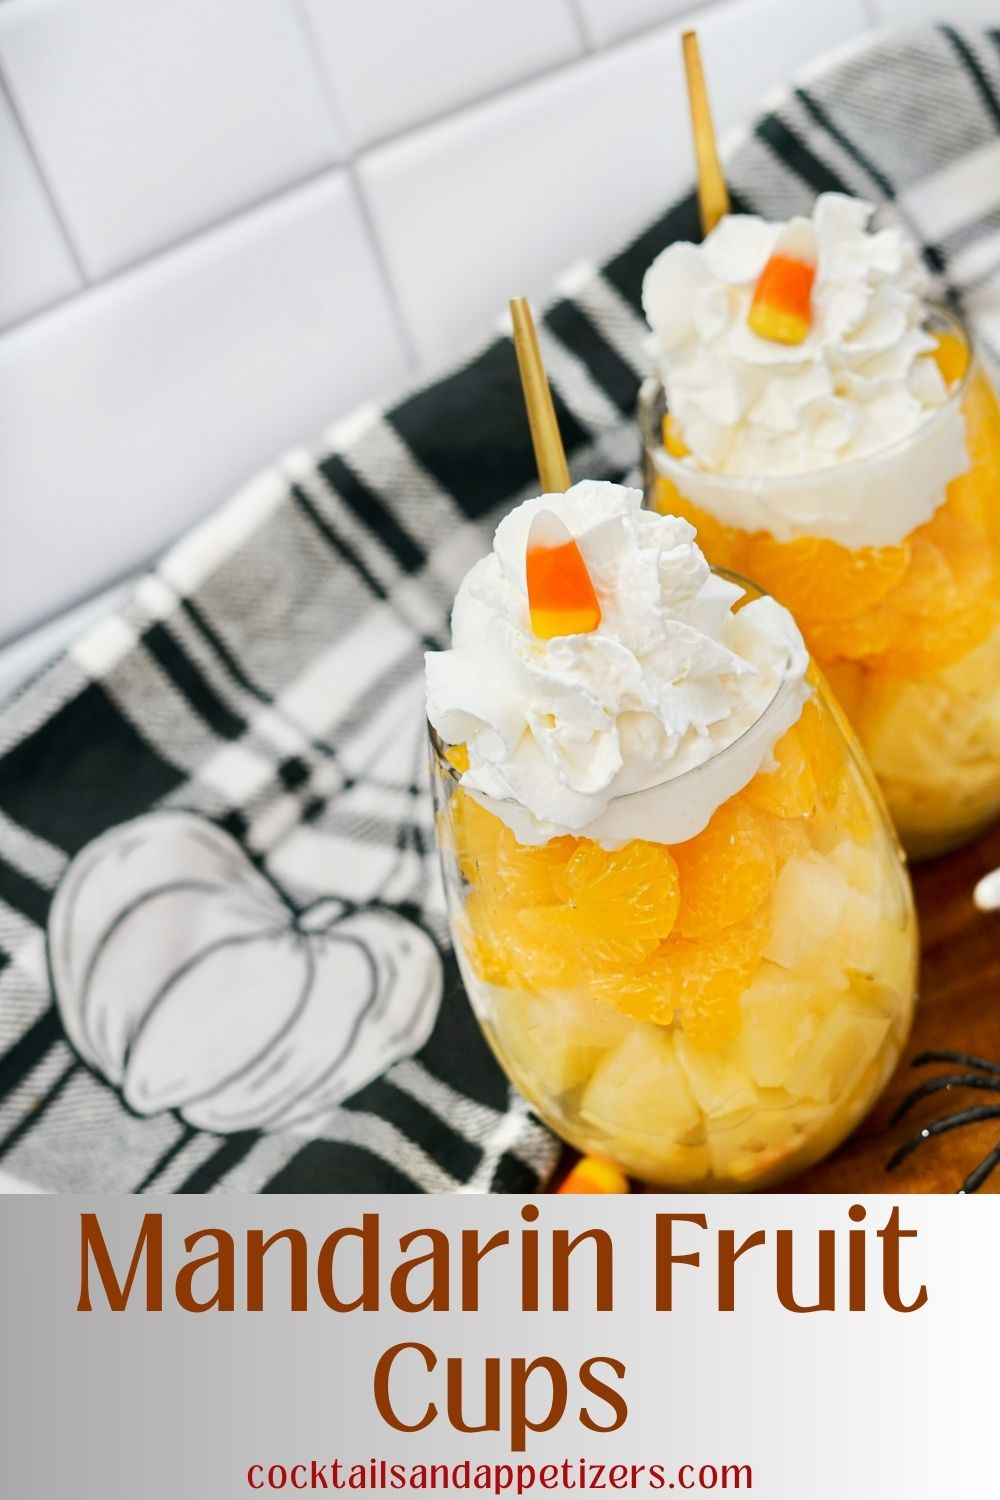 Mandarin Fruit Cups with pineapple, oranges and whipped cream.